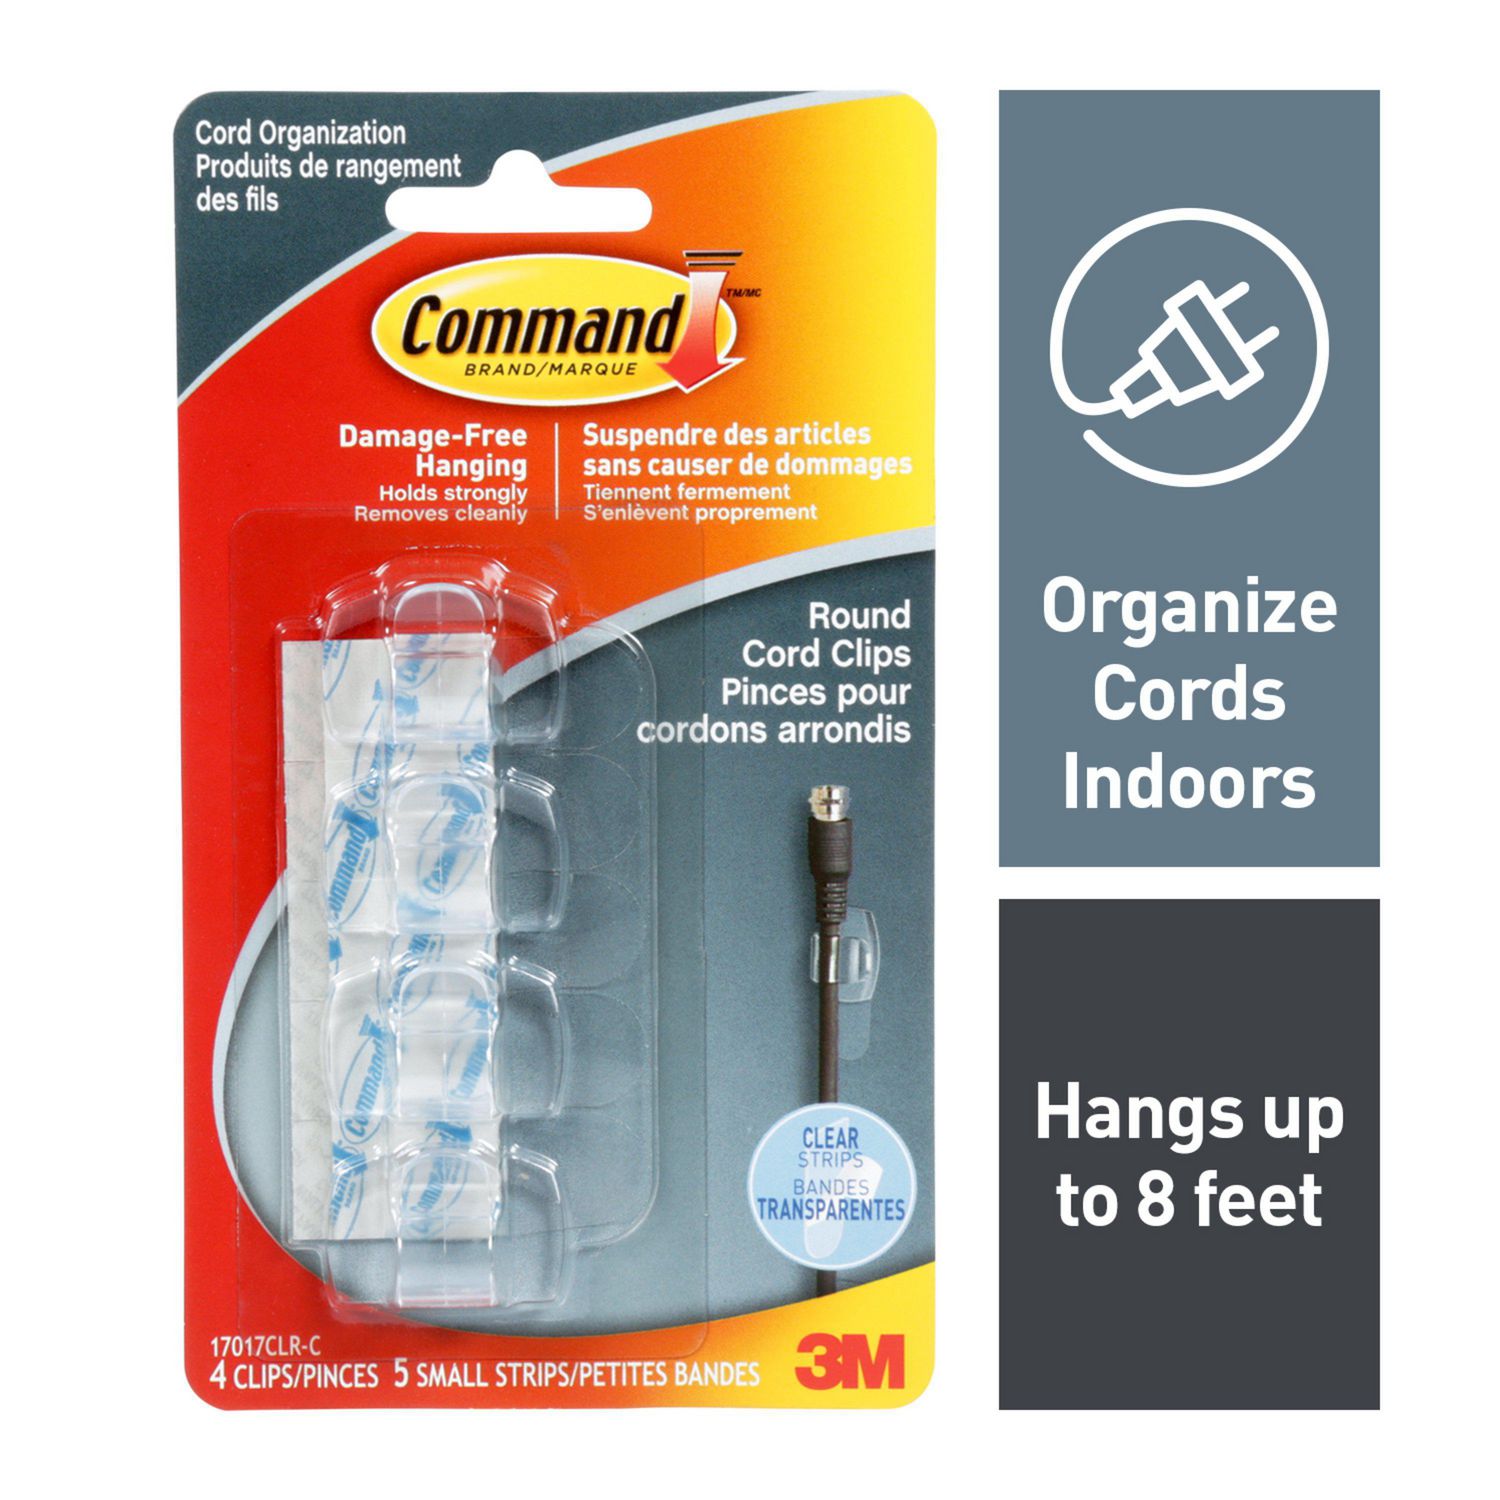 Command™ Clear Cord Clips, 17017CLR-C, Clear Cord Clips(4 Clips